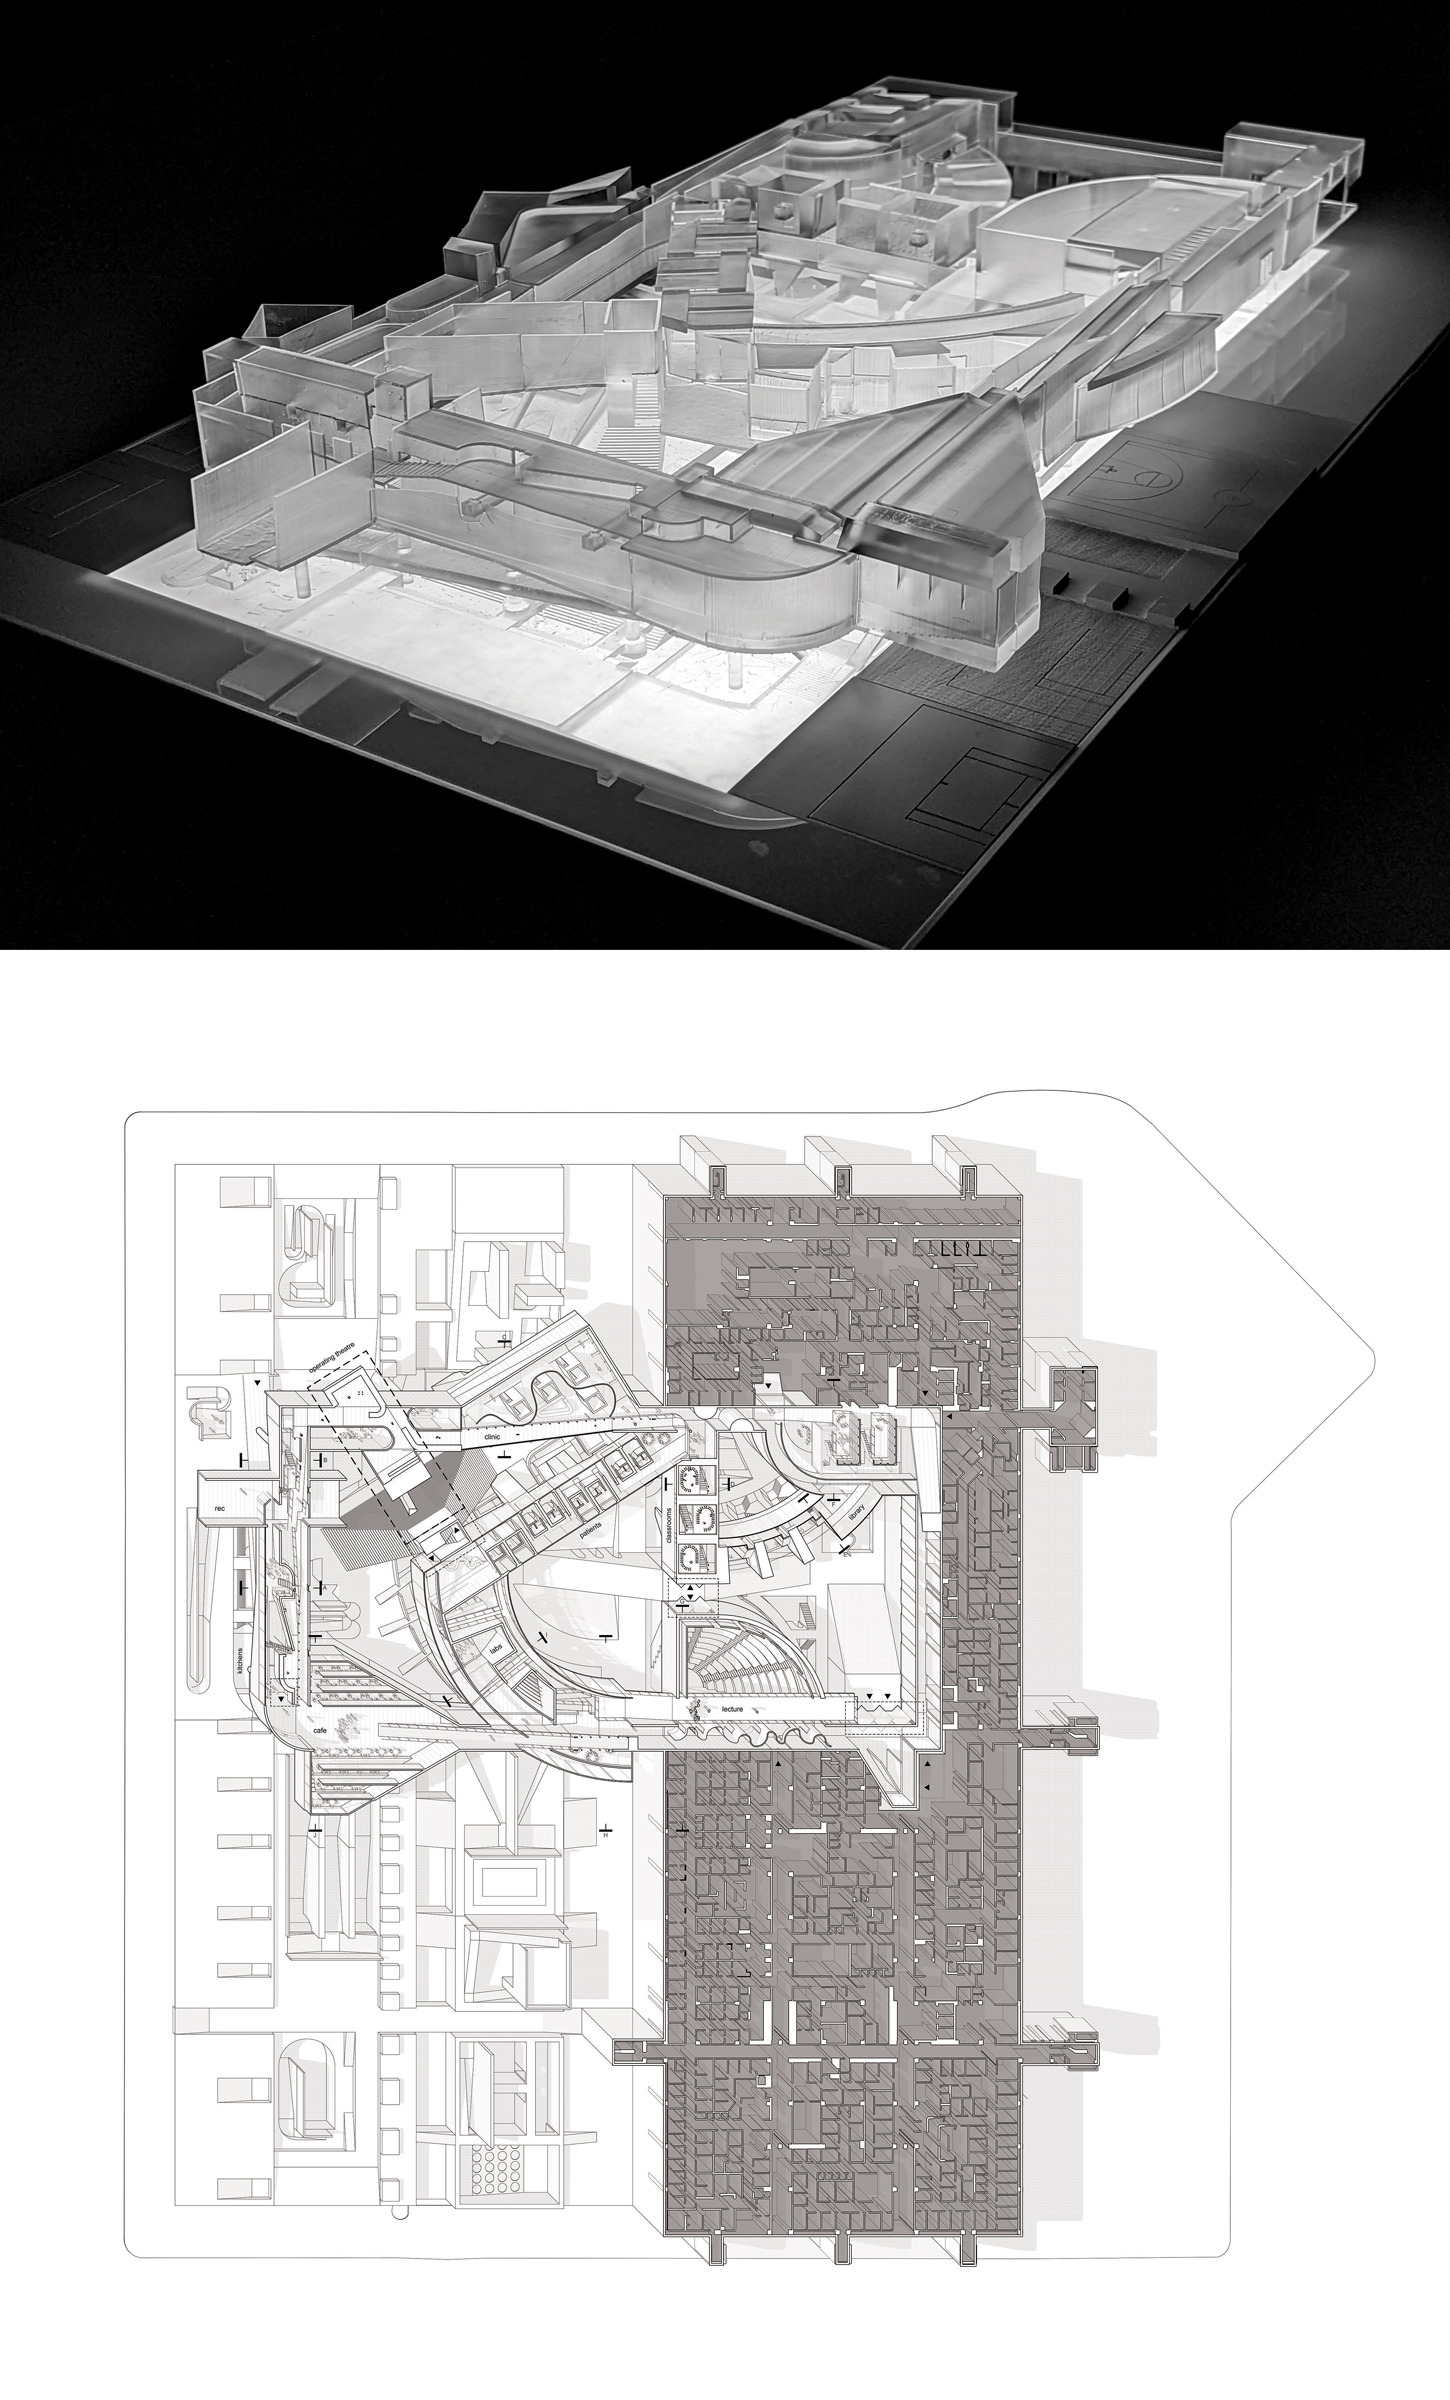 A diptych of two renderings of the same building. The top rendering is in 3D and shows the structure almost glowing. The second one is from above and shows the floorplan of the building.